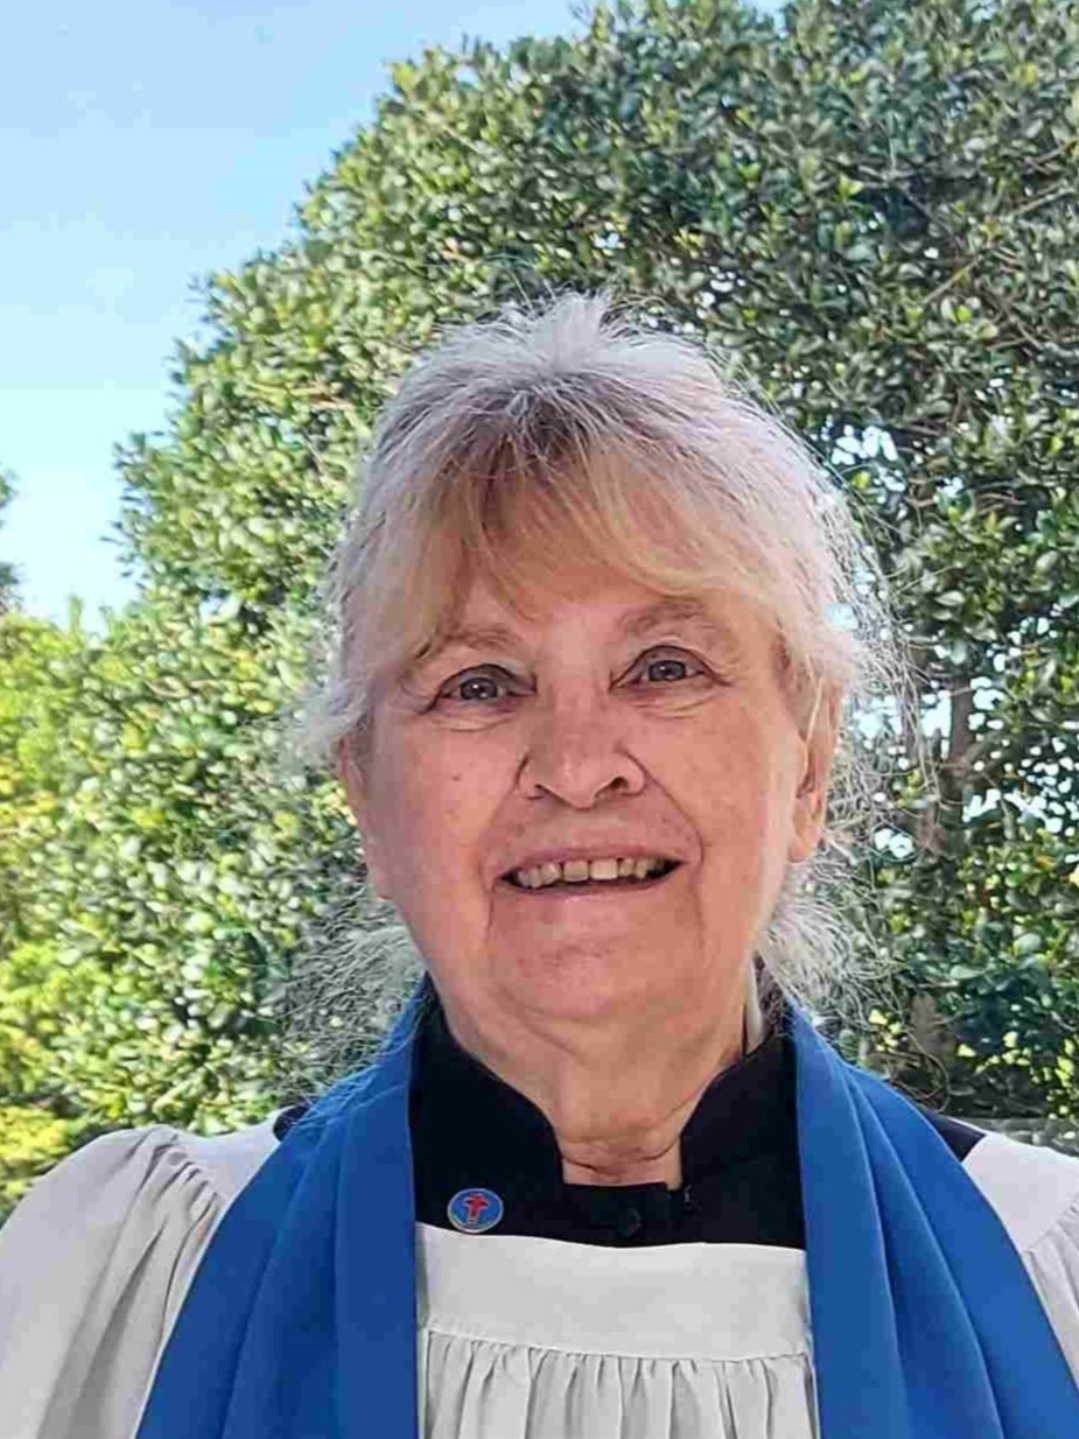 Liz Badman**Liz is a Licensed lay Minister at All Saints. She is very engaged in the pastoral work within and beyond the parish and in the organization of the Parish Retreat and prayer and meditation events.